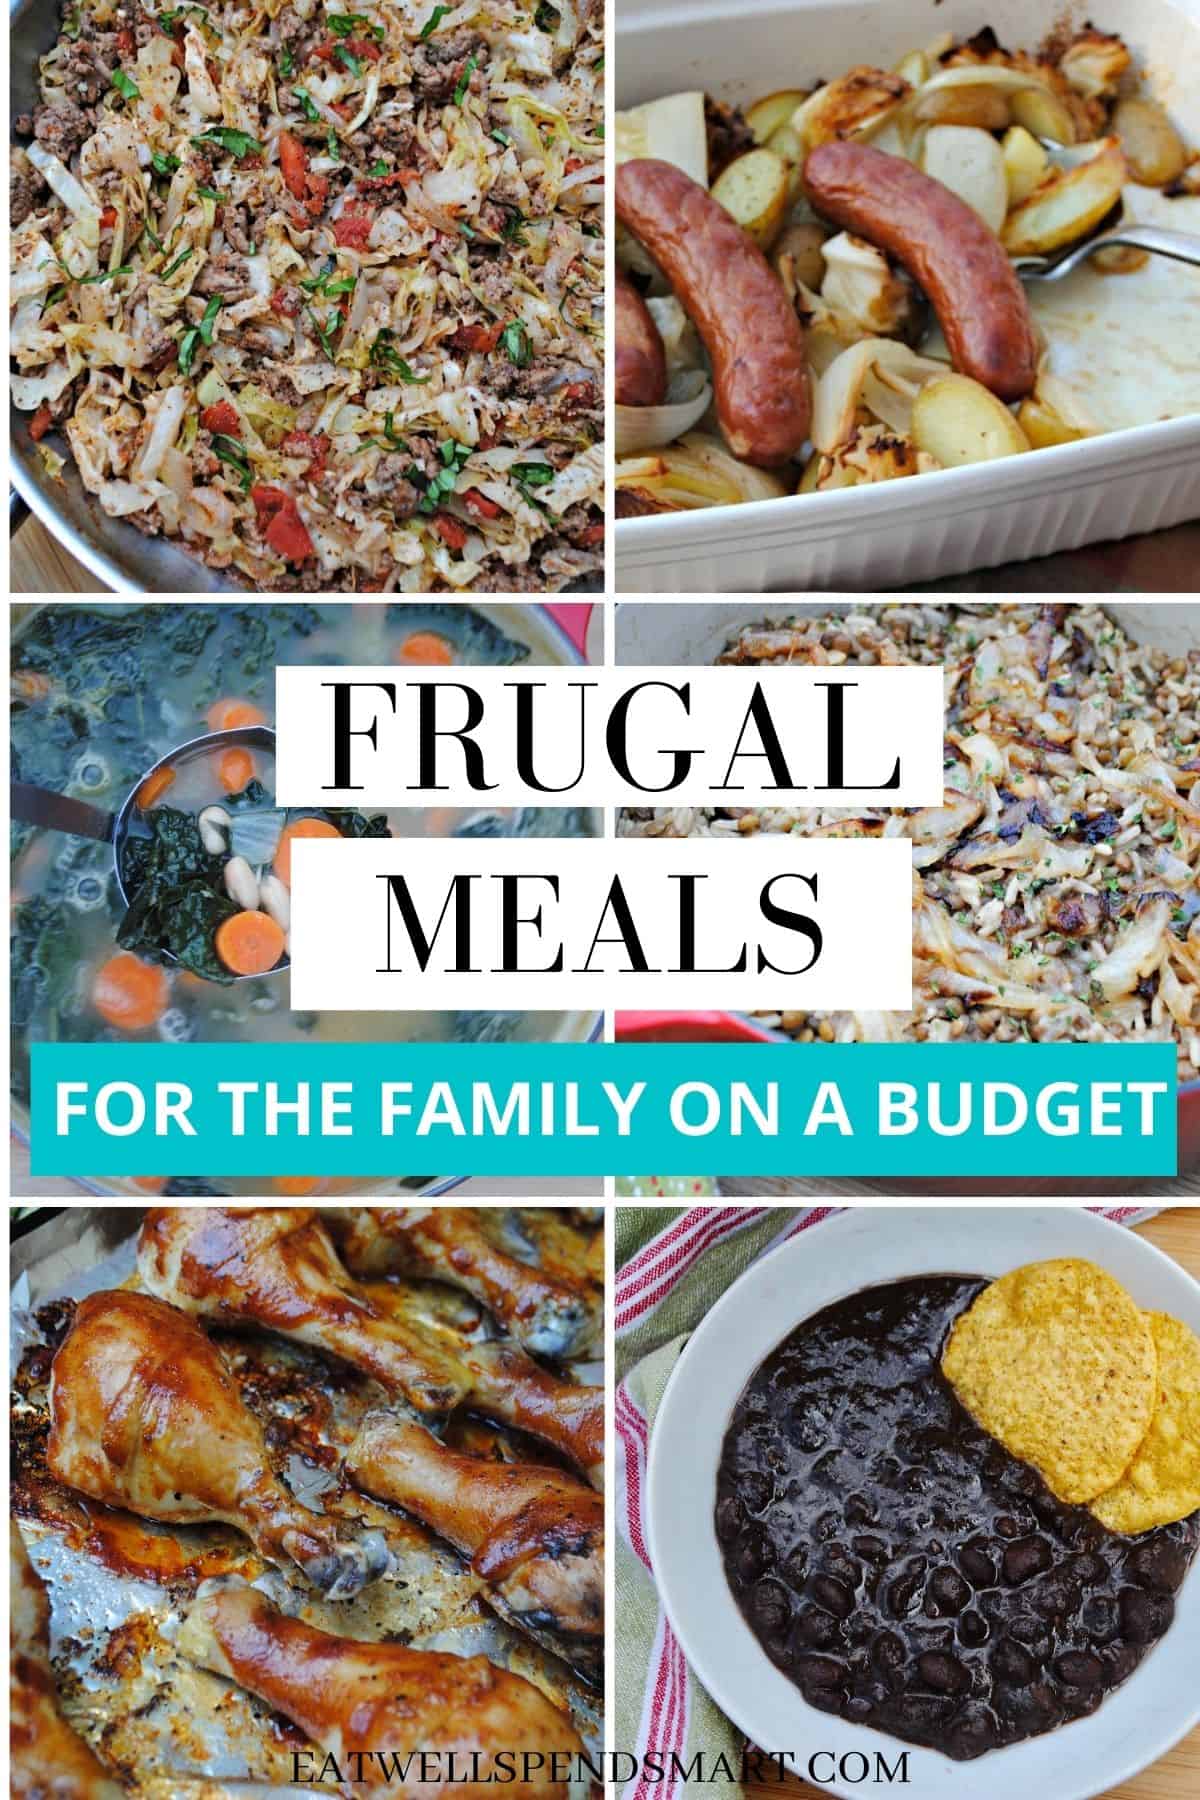 Frugal food choices